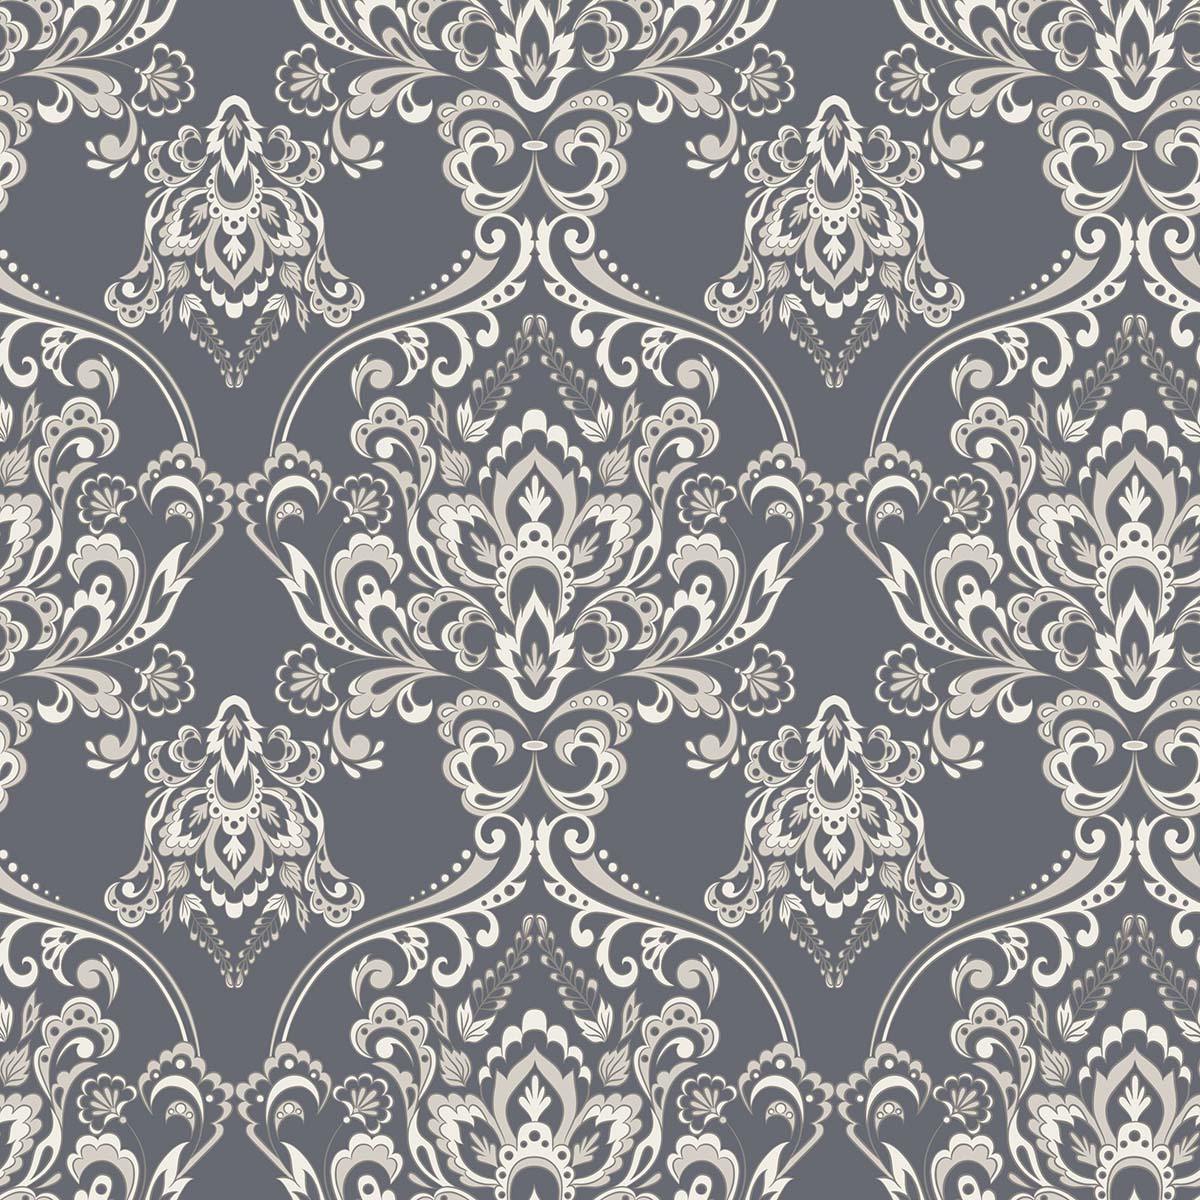 A pattern of white and gray floral designs